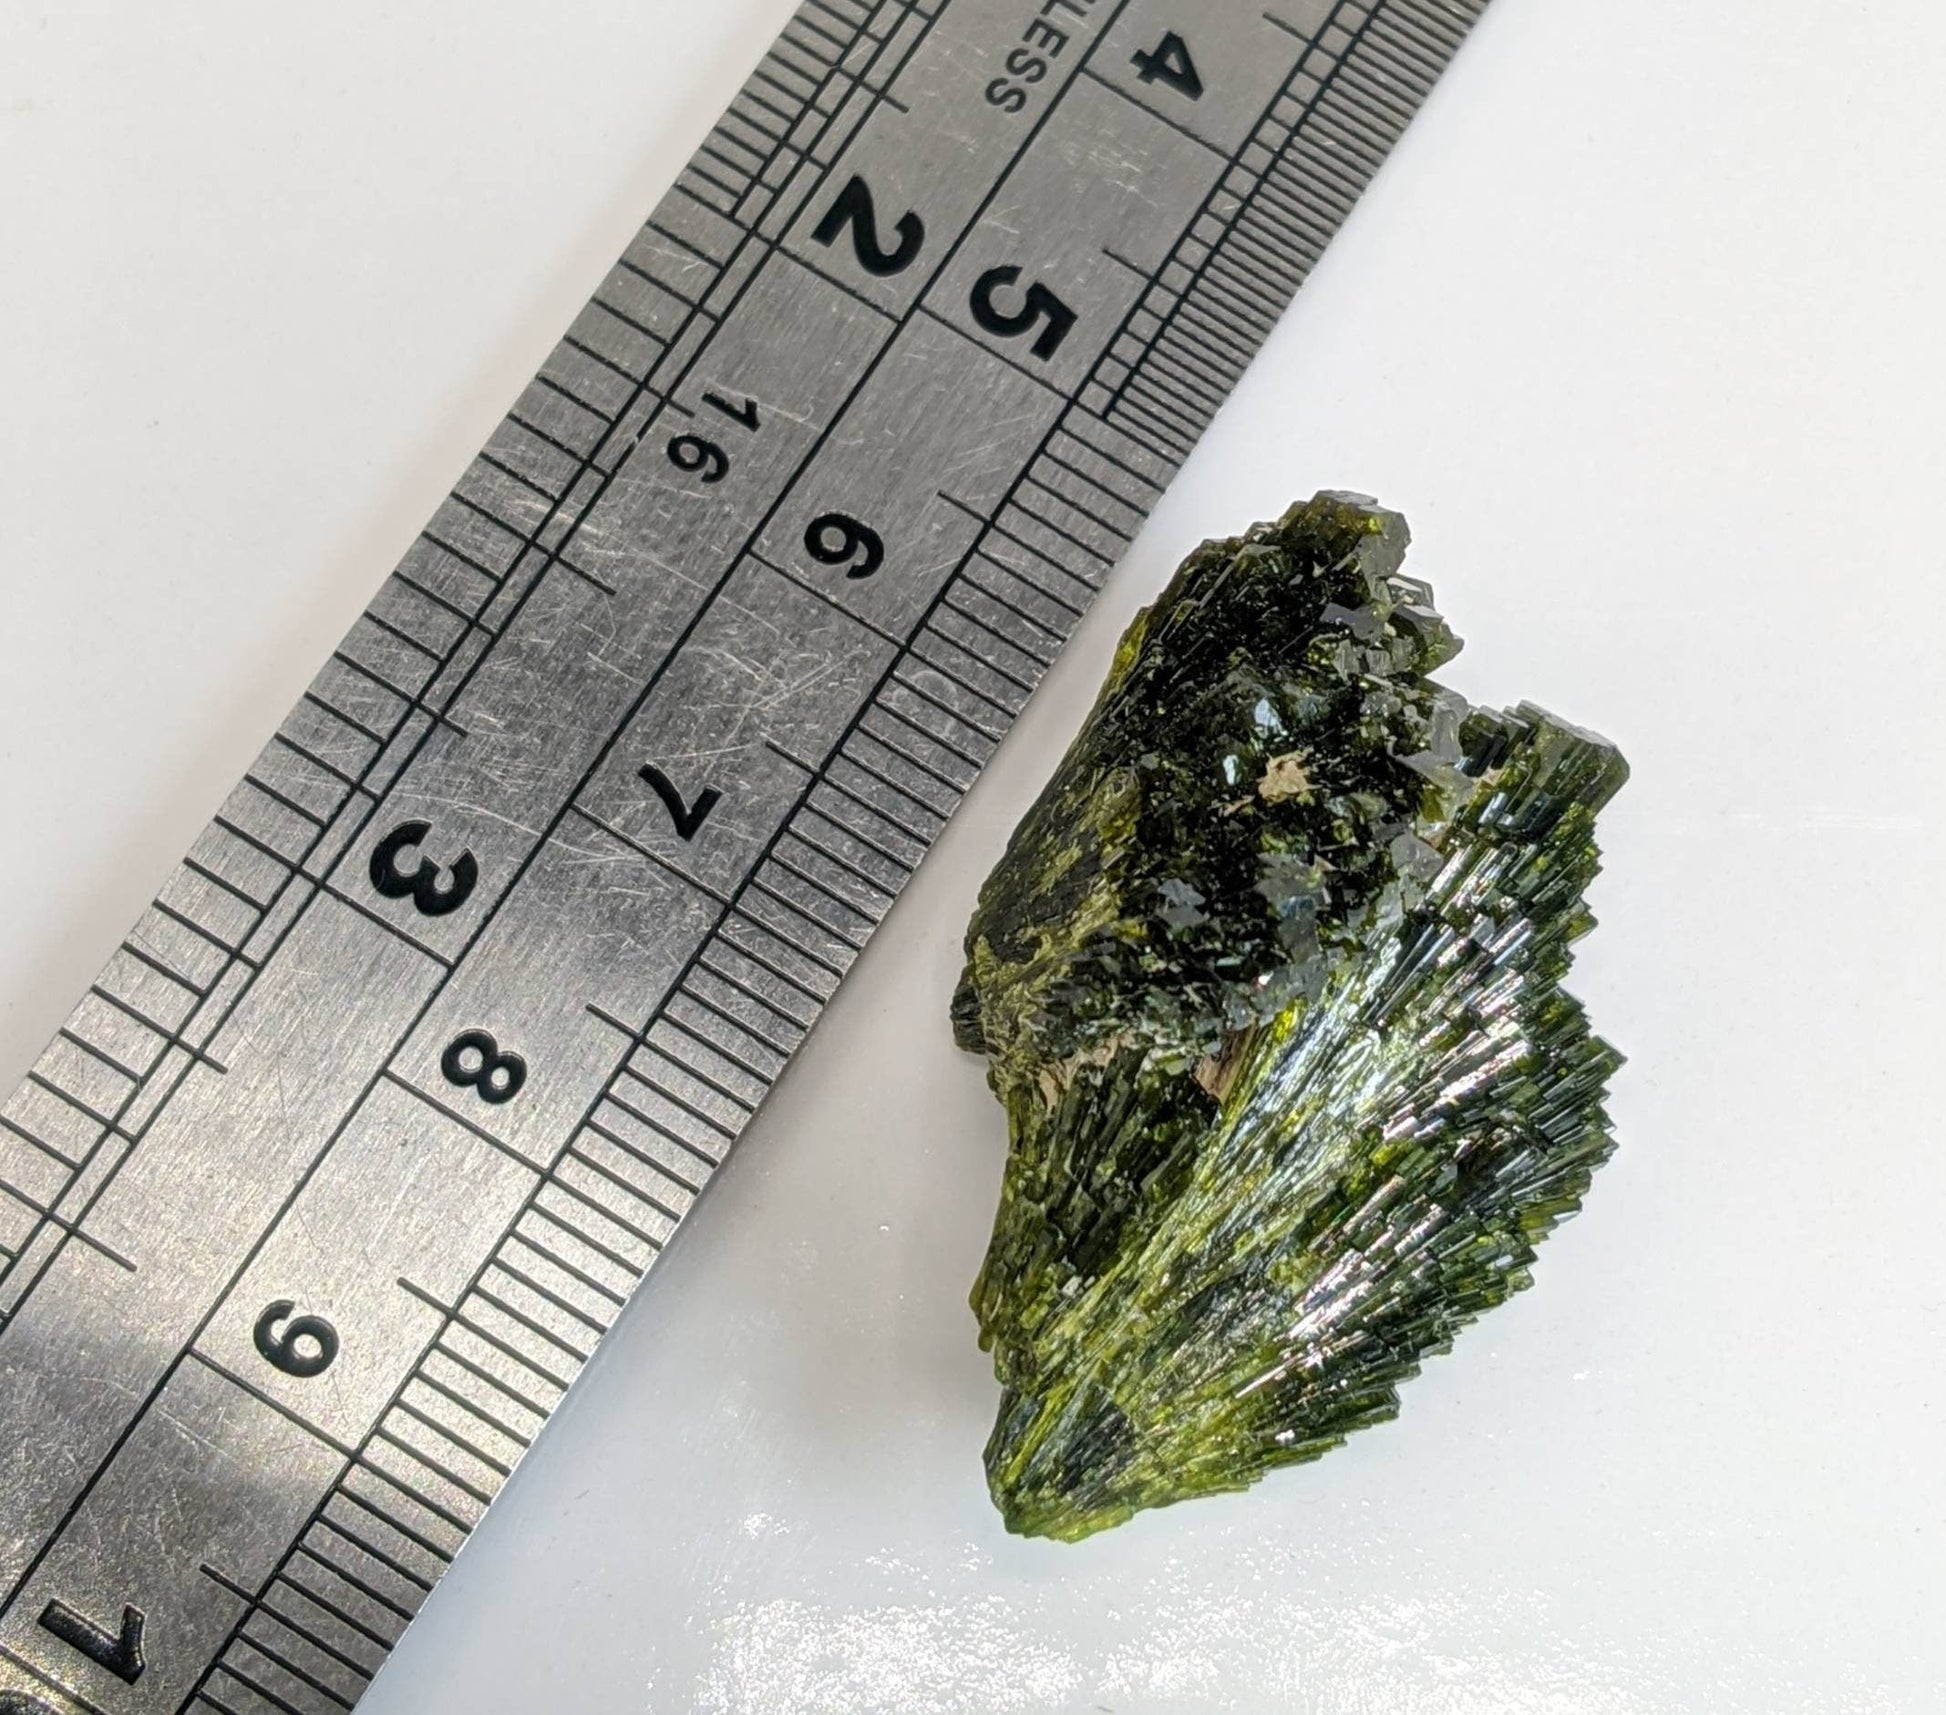 ARSAA GEMS AND MINERALSNatural green spray epidote crystal from Balochistan Pakistan, weight 10.4 grams - Premium  from ARSAA GEMS AND MINERALS - Just $20.00! Shop now at ARSAA GEMS AND MINERALS